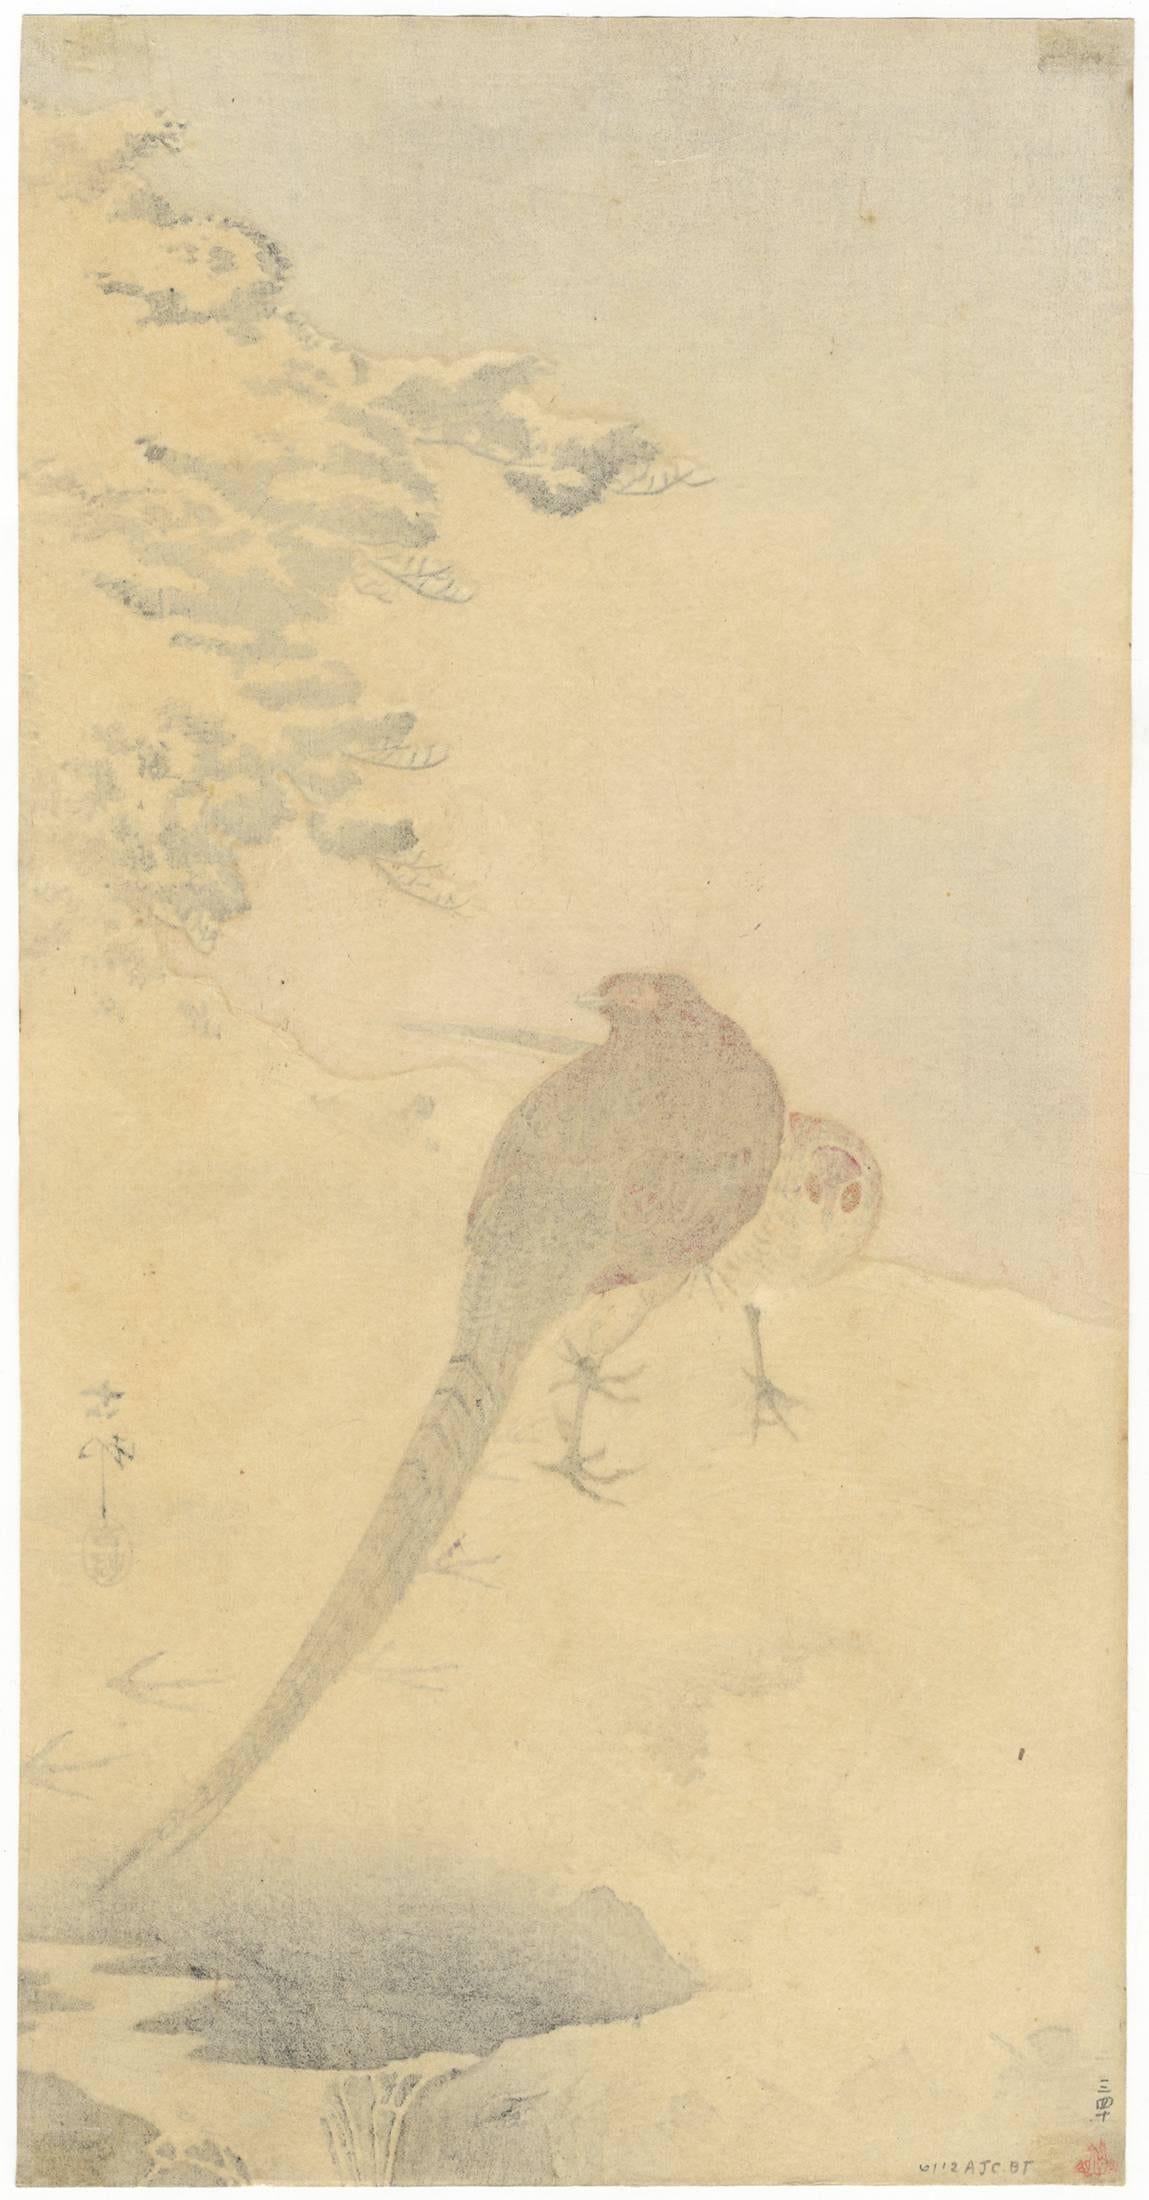 Artist: Koson Ohara (1877-1945)
Title: A Couple of Pheasants in the Snow
Published: 1900-1949.

Ohara Koson was one of great print makers of the 20th century, best known for his kacho-e, prints of flowers and birds.

Koson's prints after 1926